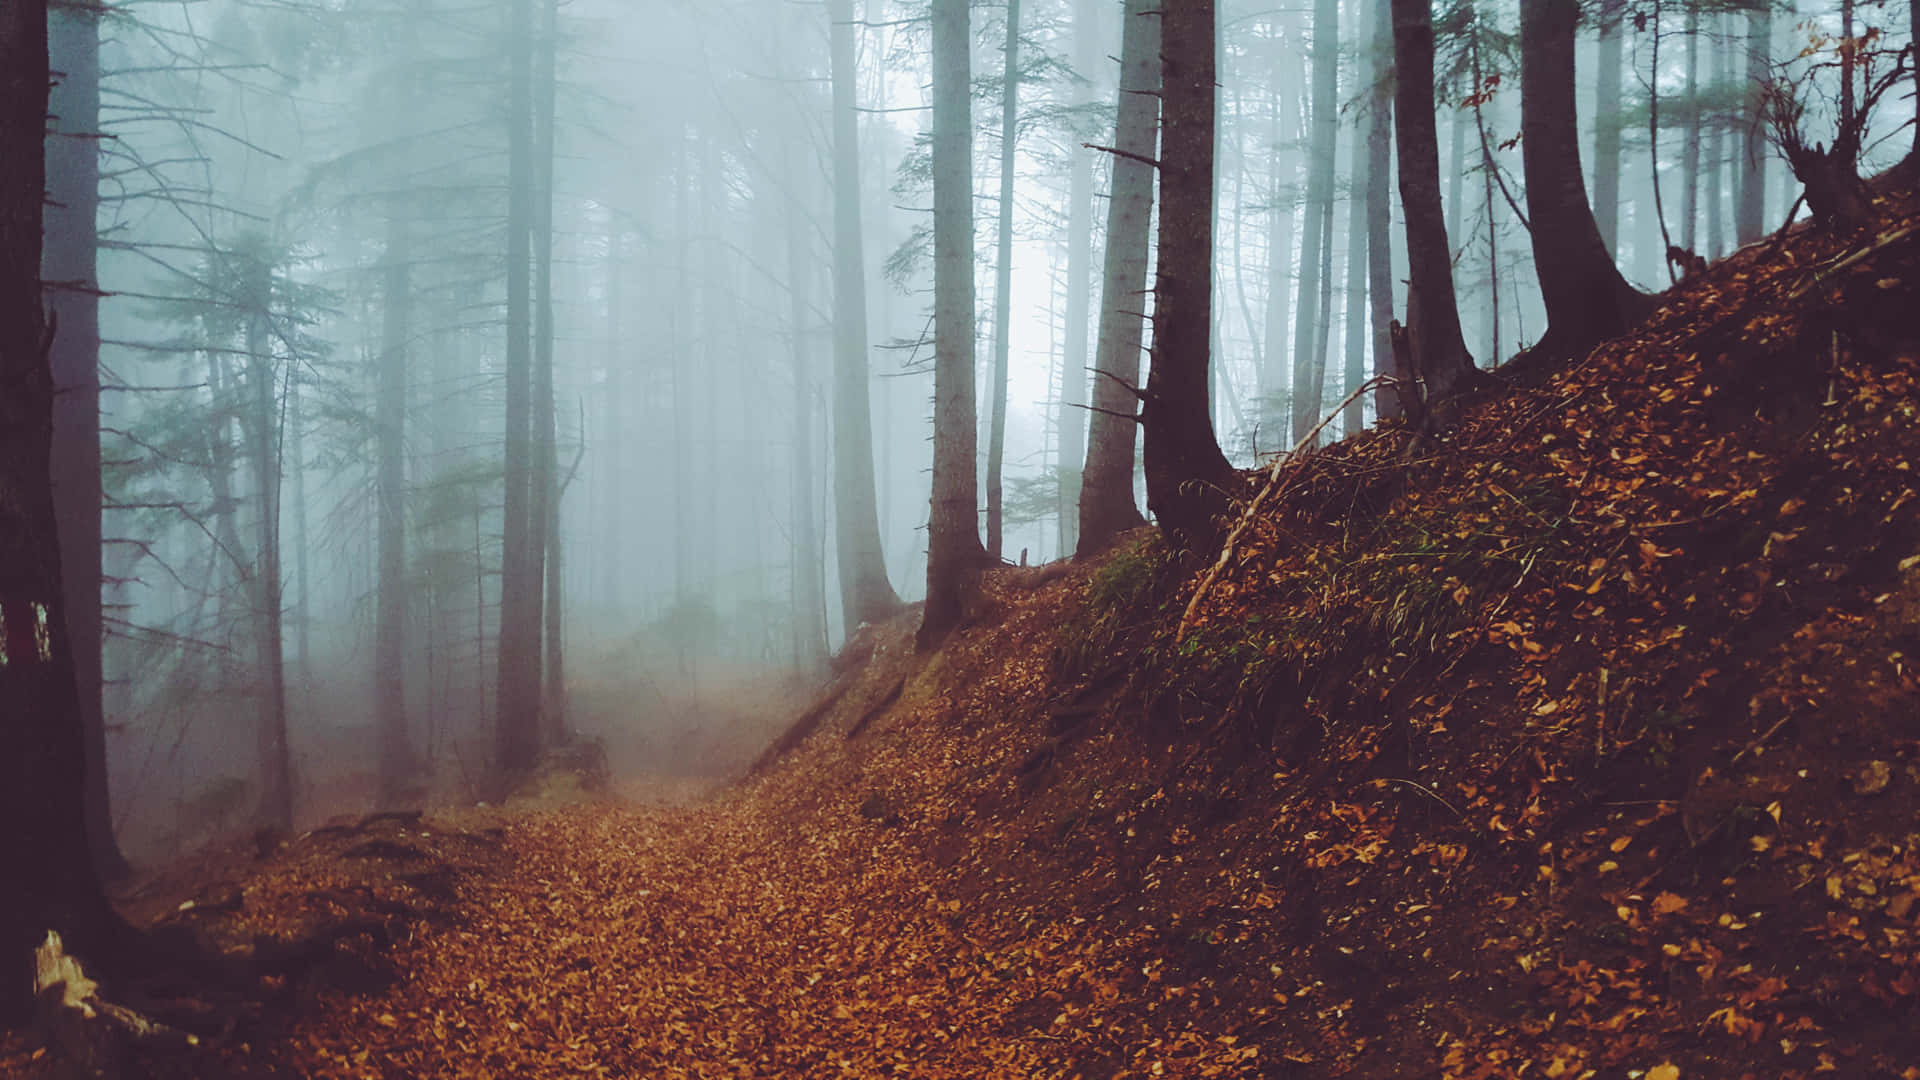 Enchanting Fall Fog Over a Forest Wallpaper